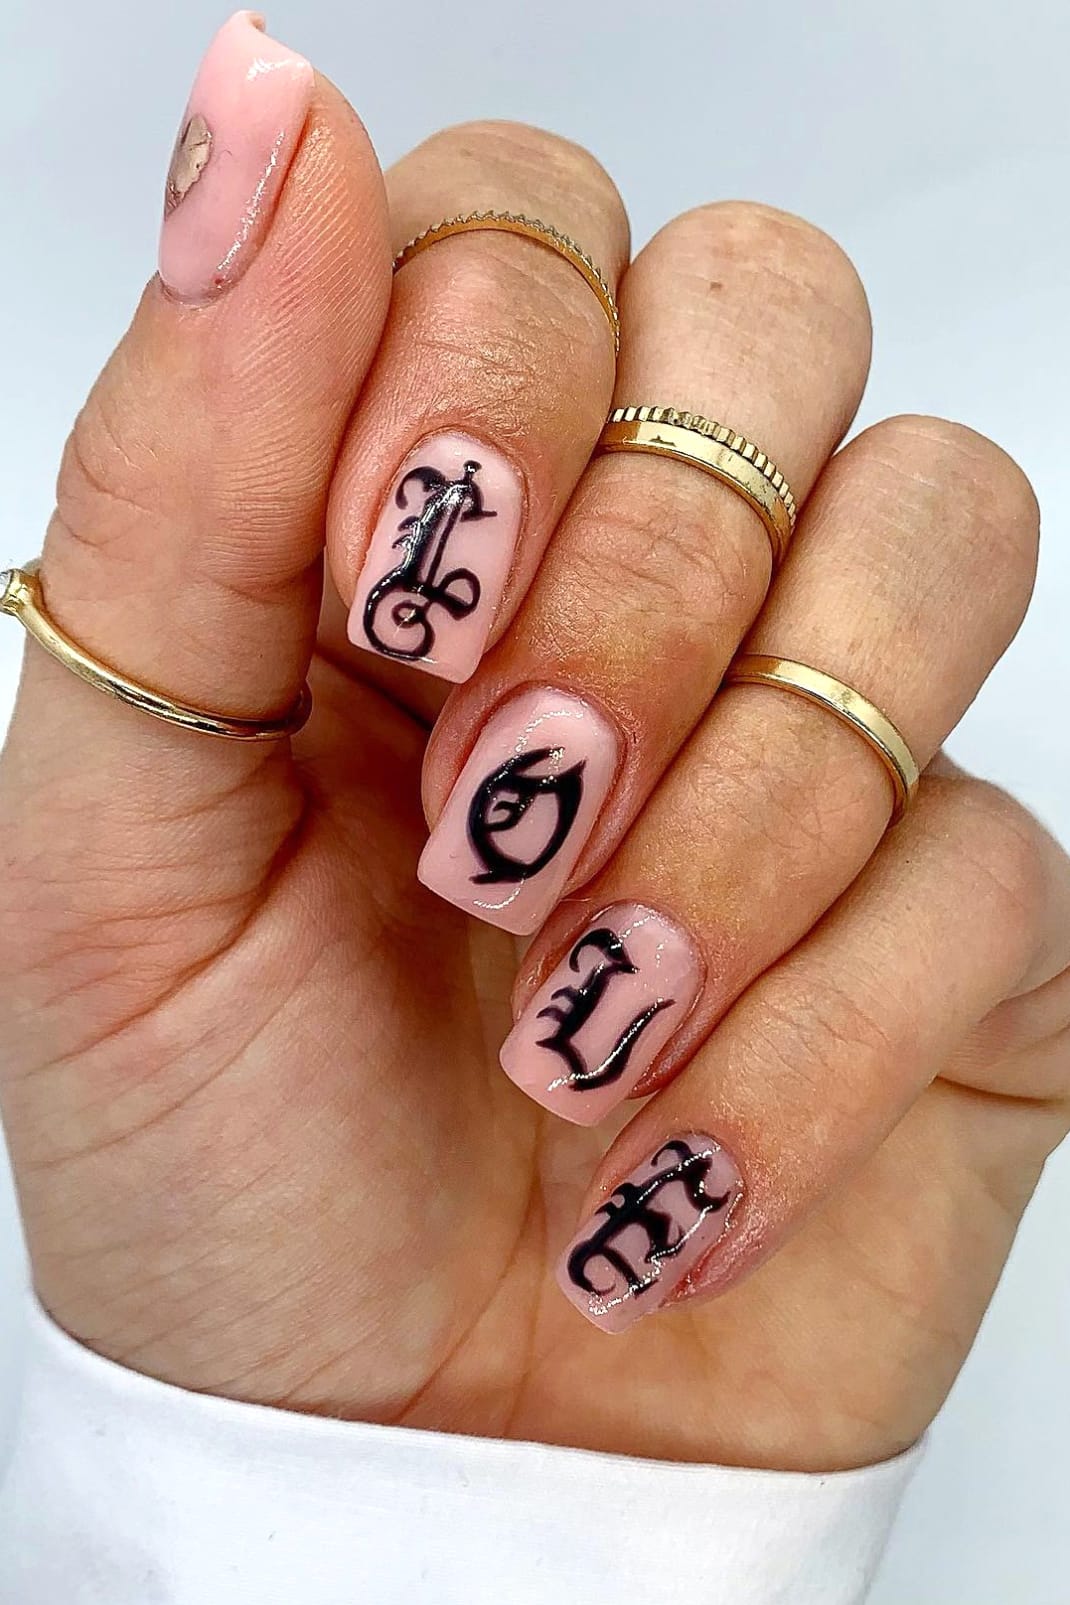 Nude nails with old English letters